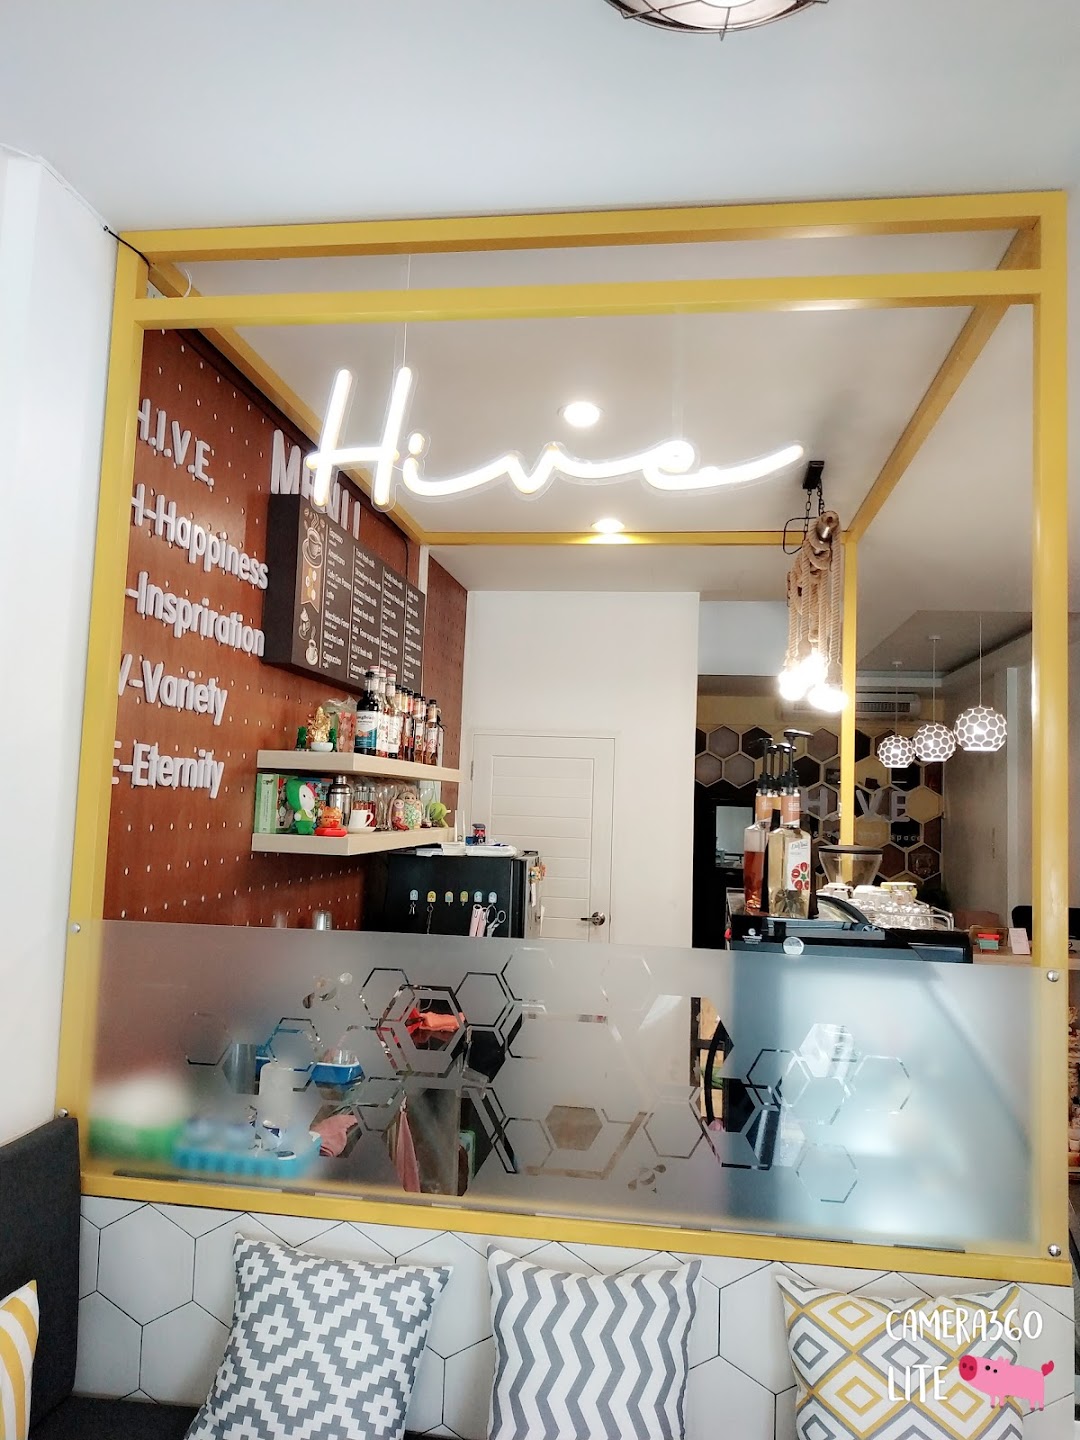 Hive cafe & co working space